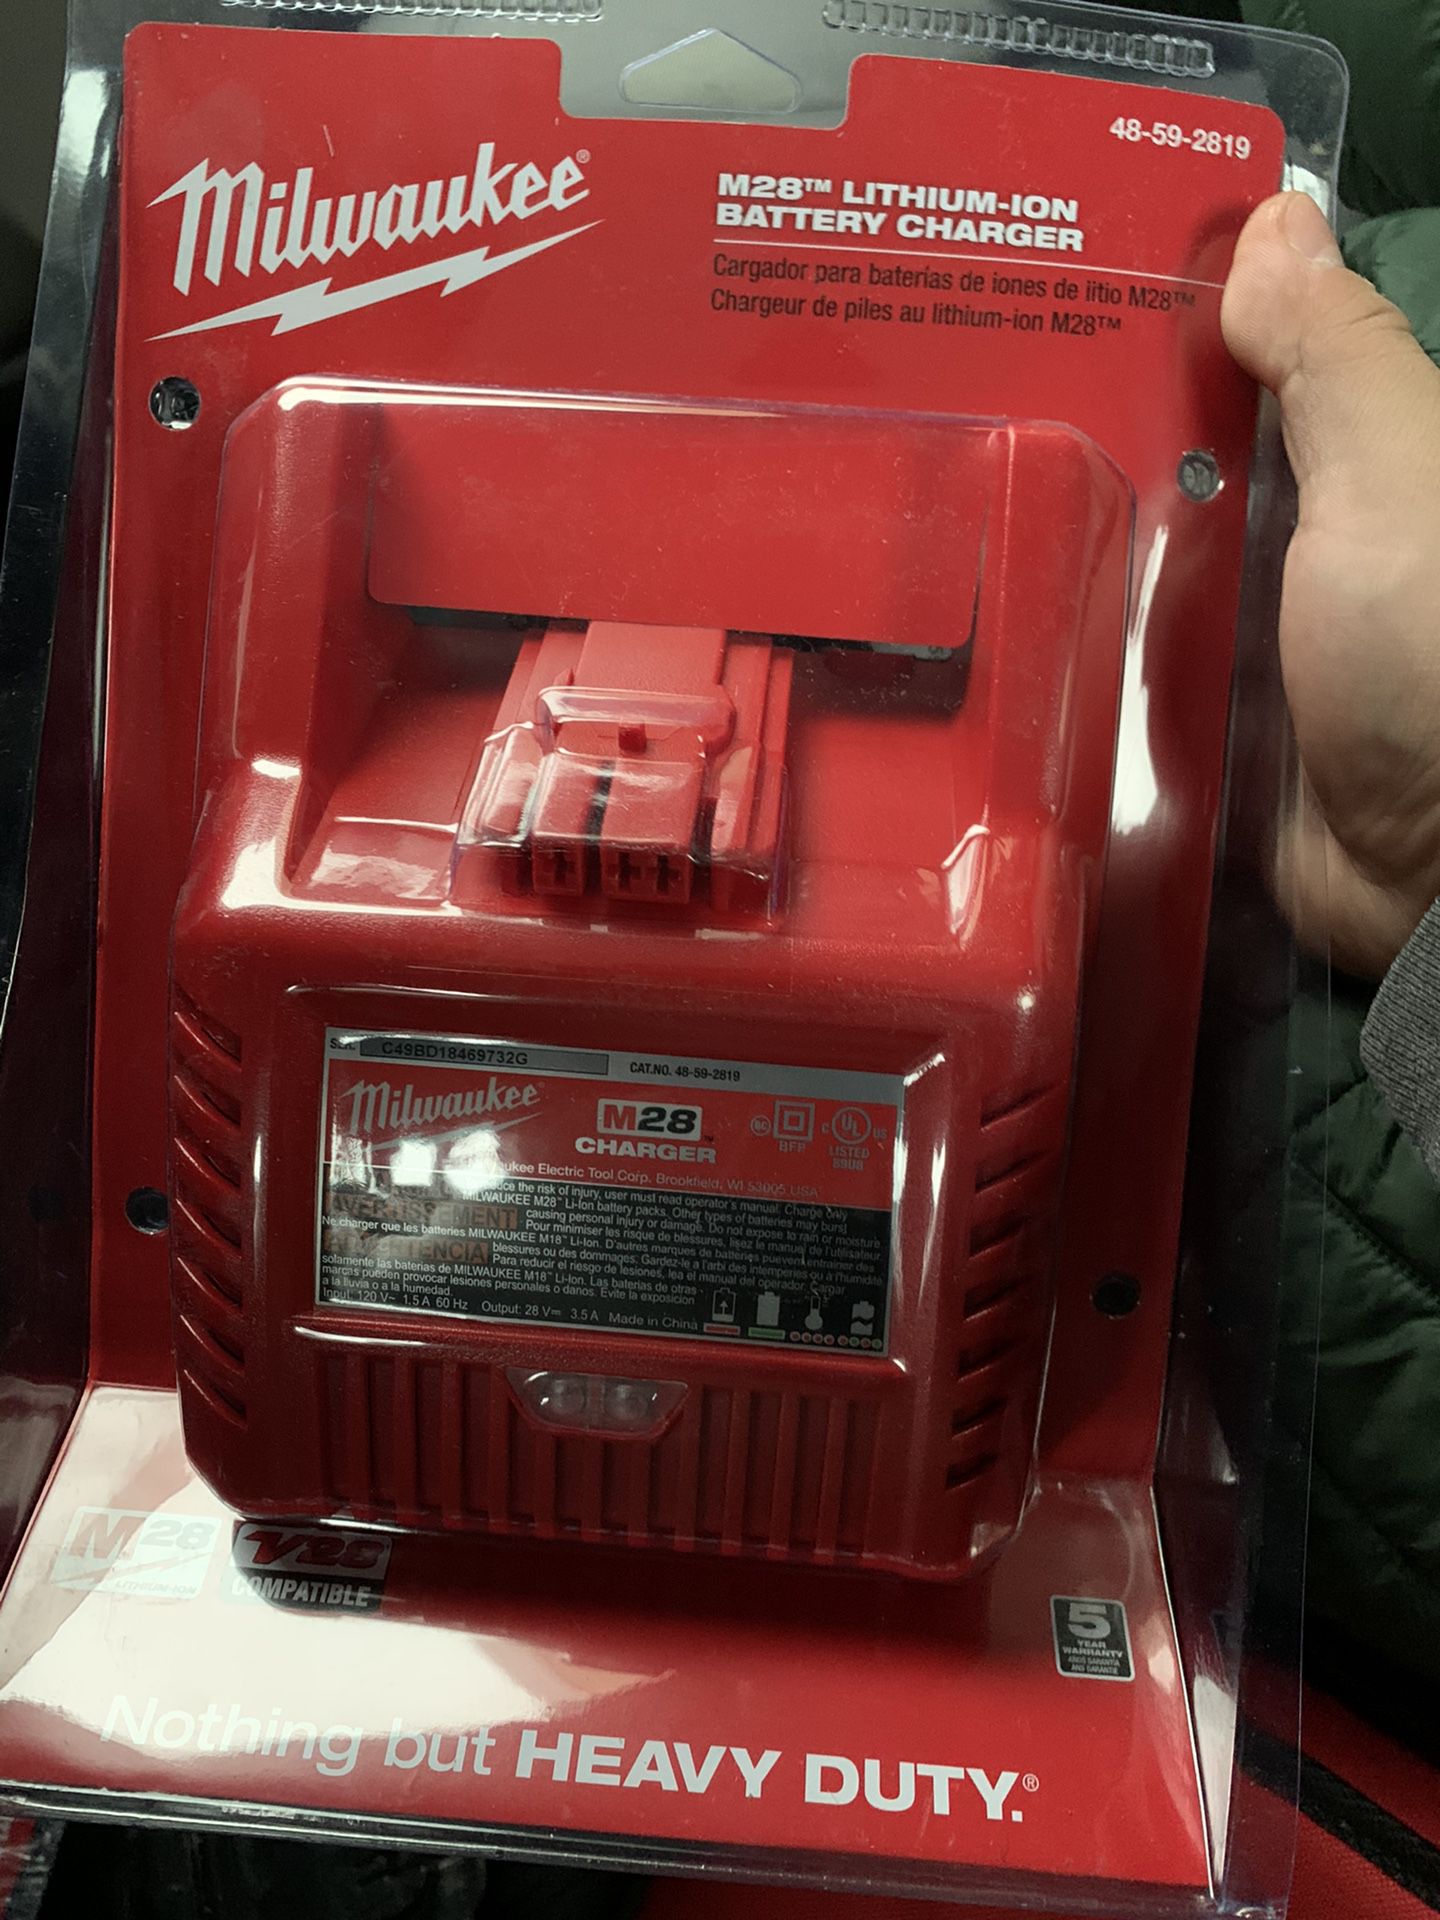 New Milwaukee M28 charger